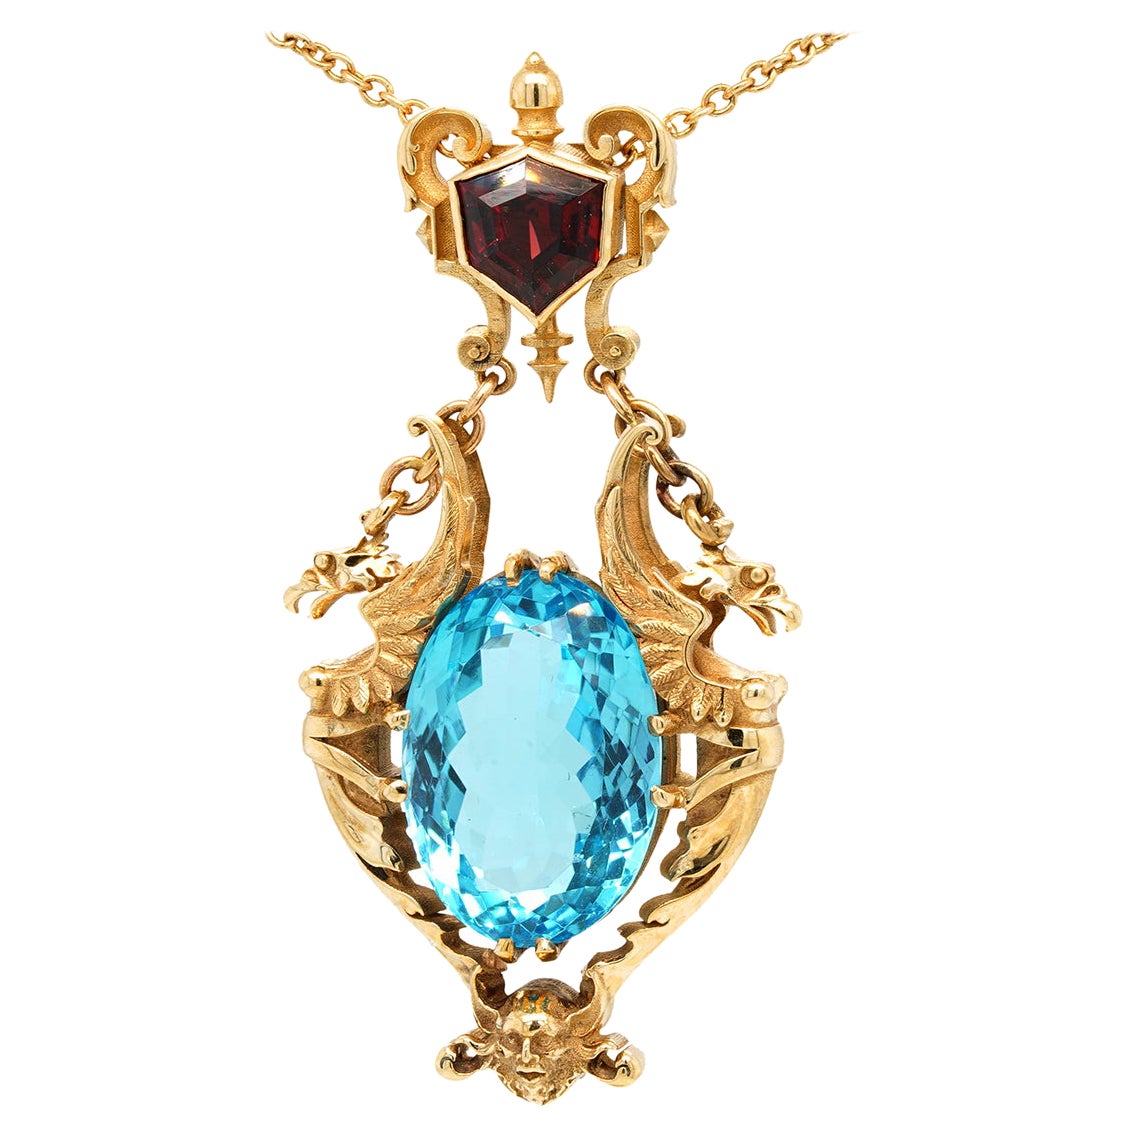 28ct Oval Swiss Blue Topaz, Garnet 9k Yellow Gold Antique Style Pendant Necklace For Sale